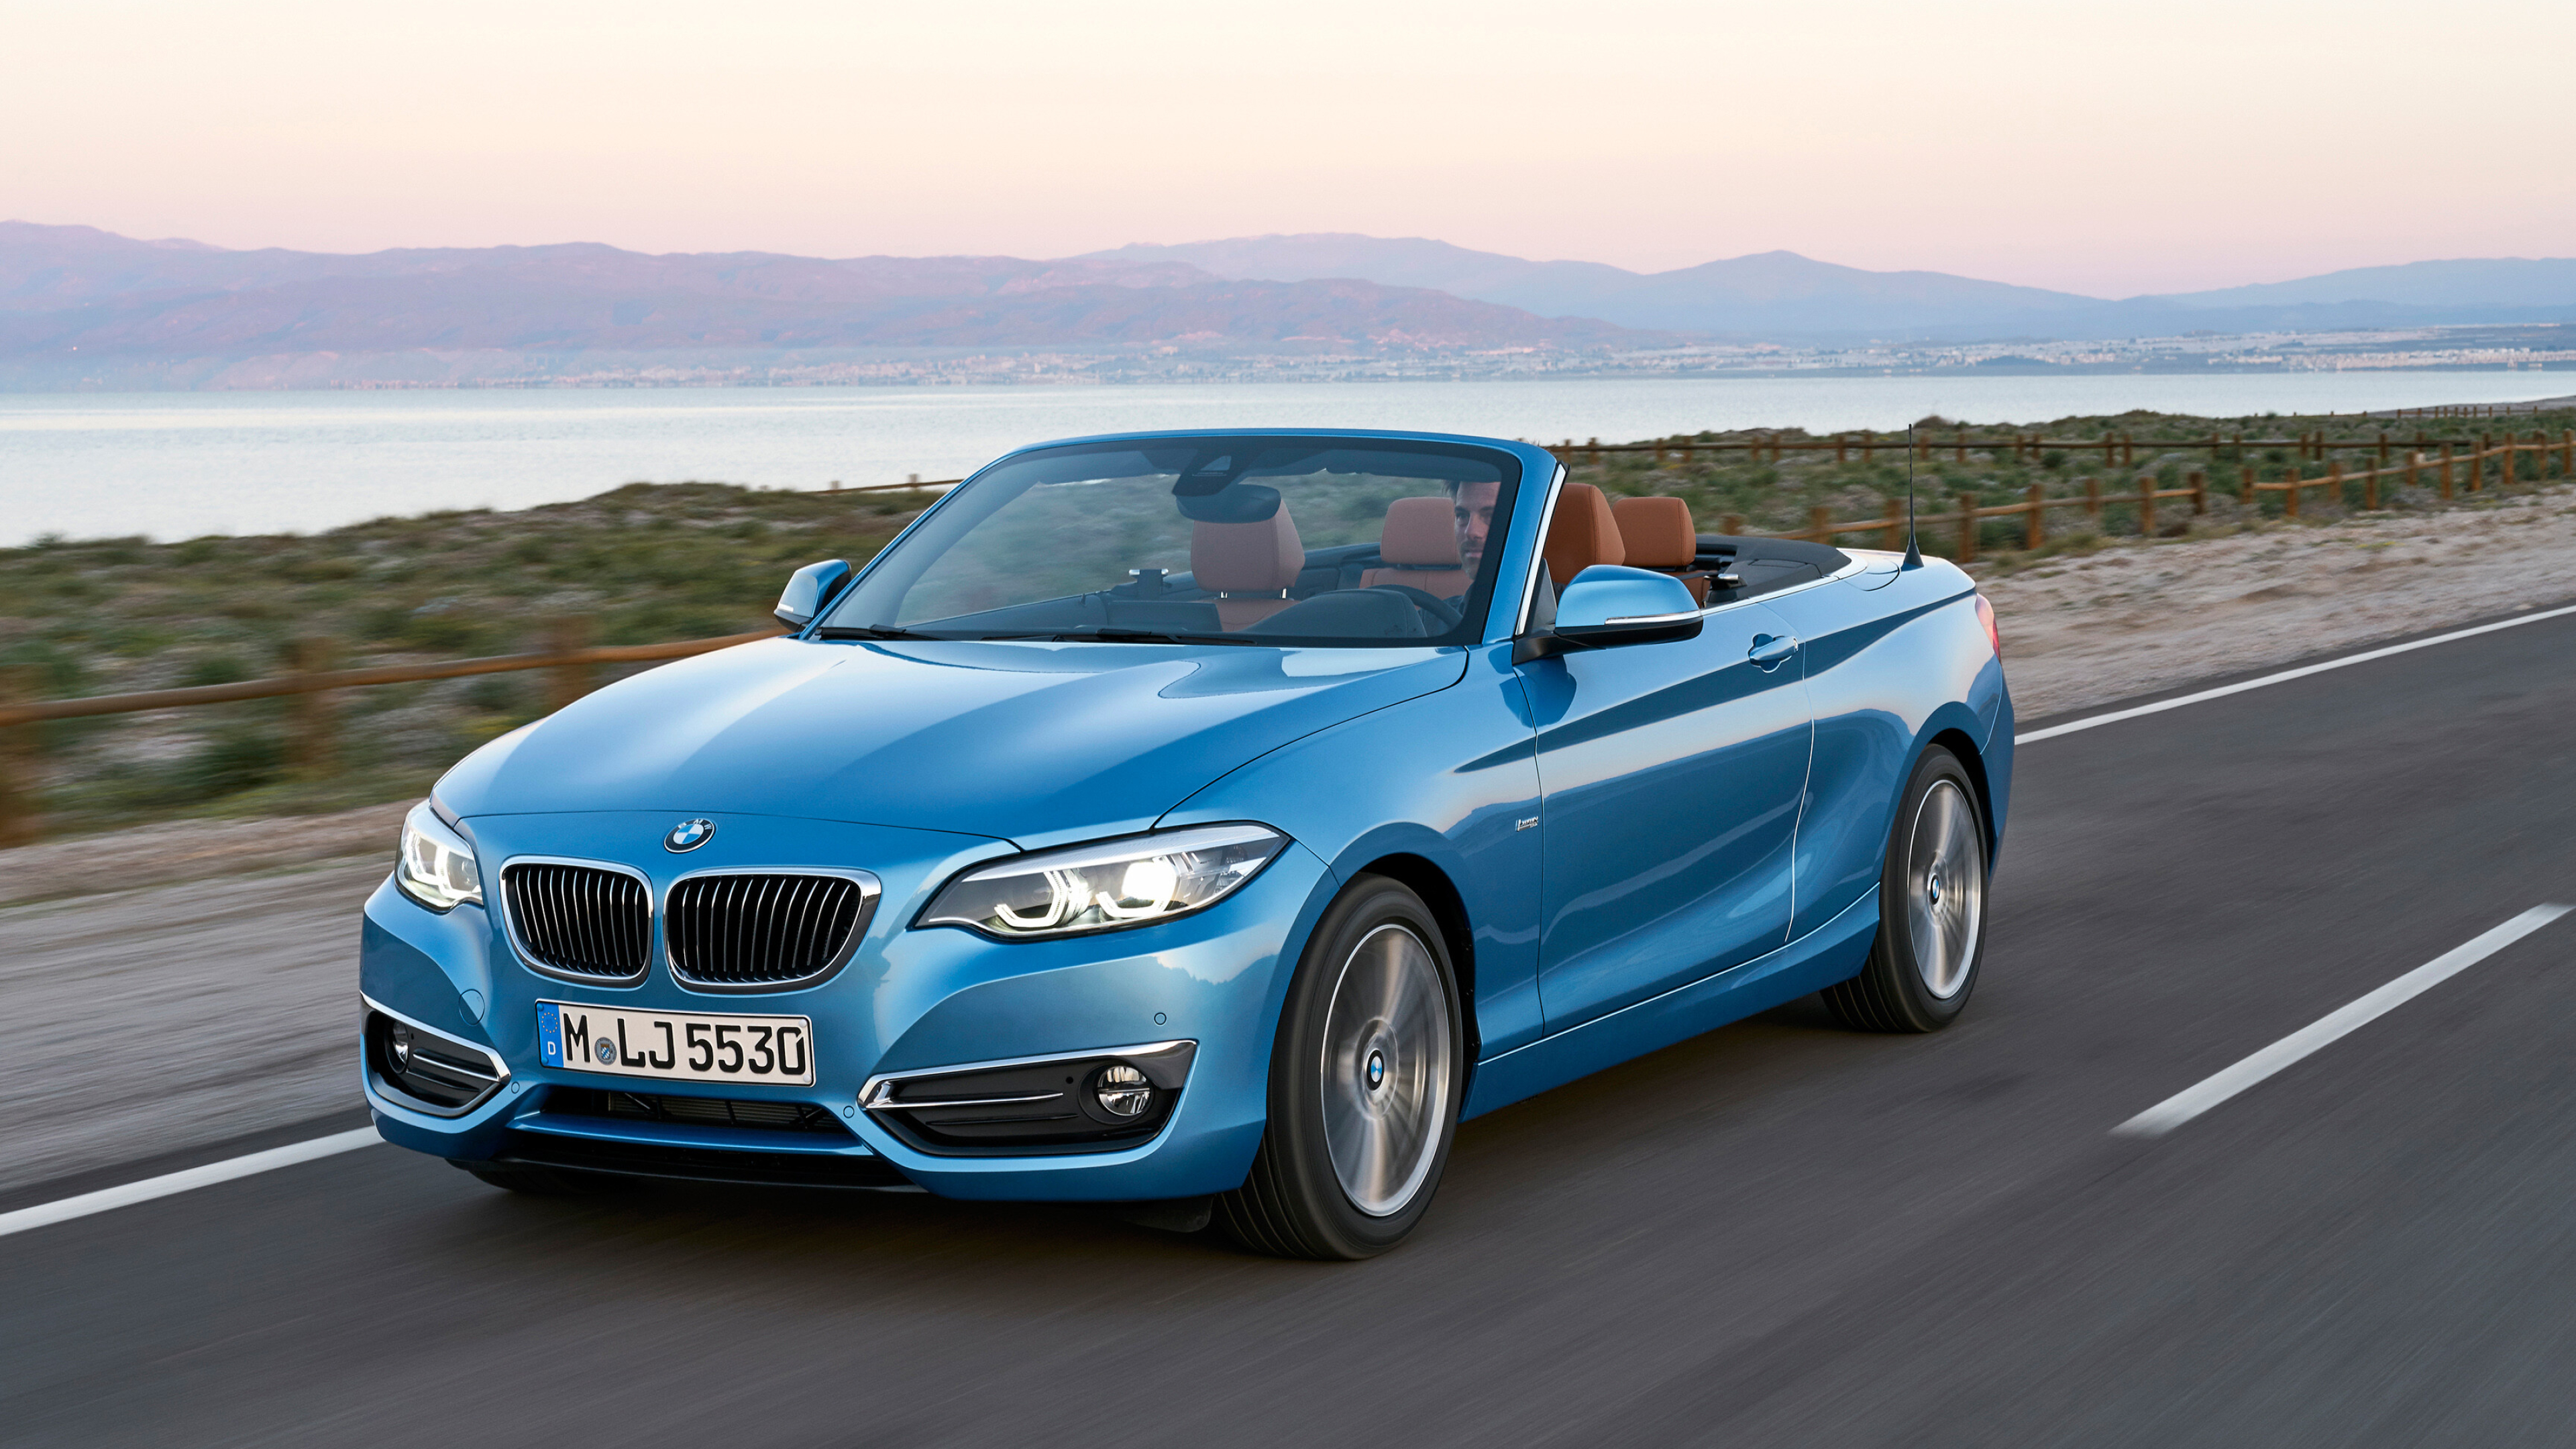 BMW 2 Series: An entry-level luxury car, Manufactured since 2014. 3840x2160 4K Background.